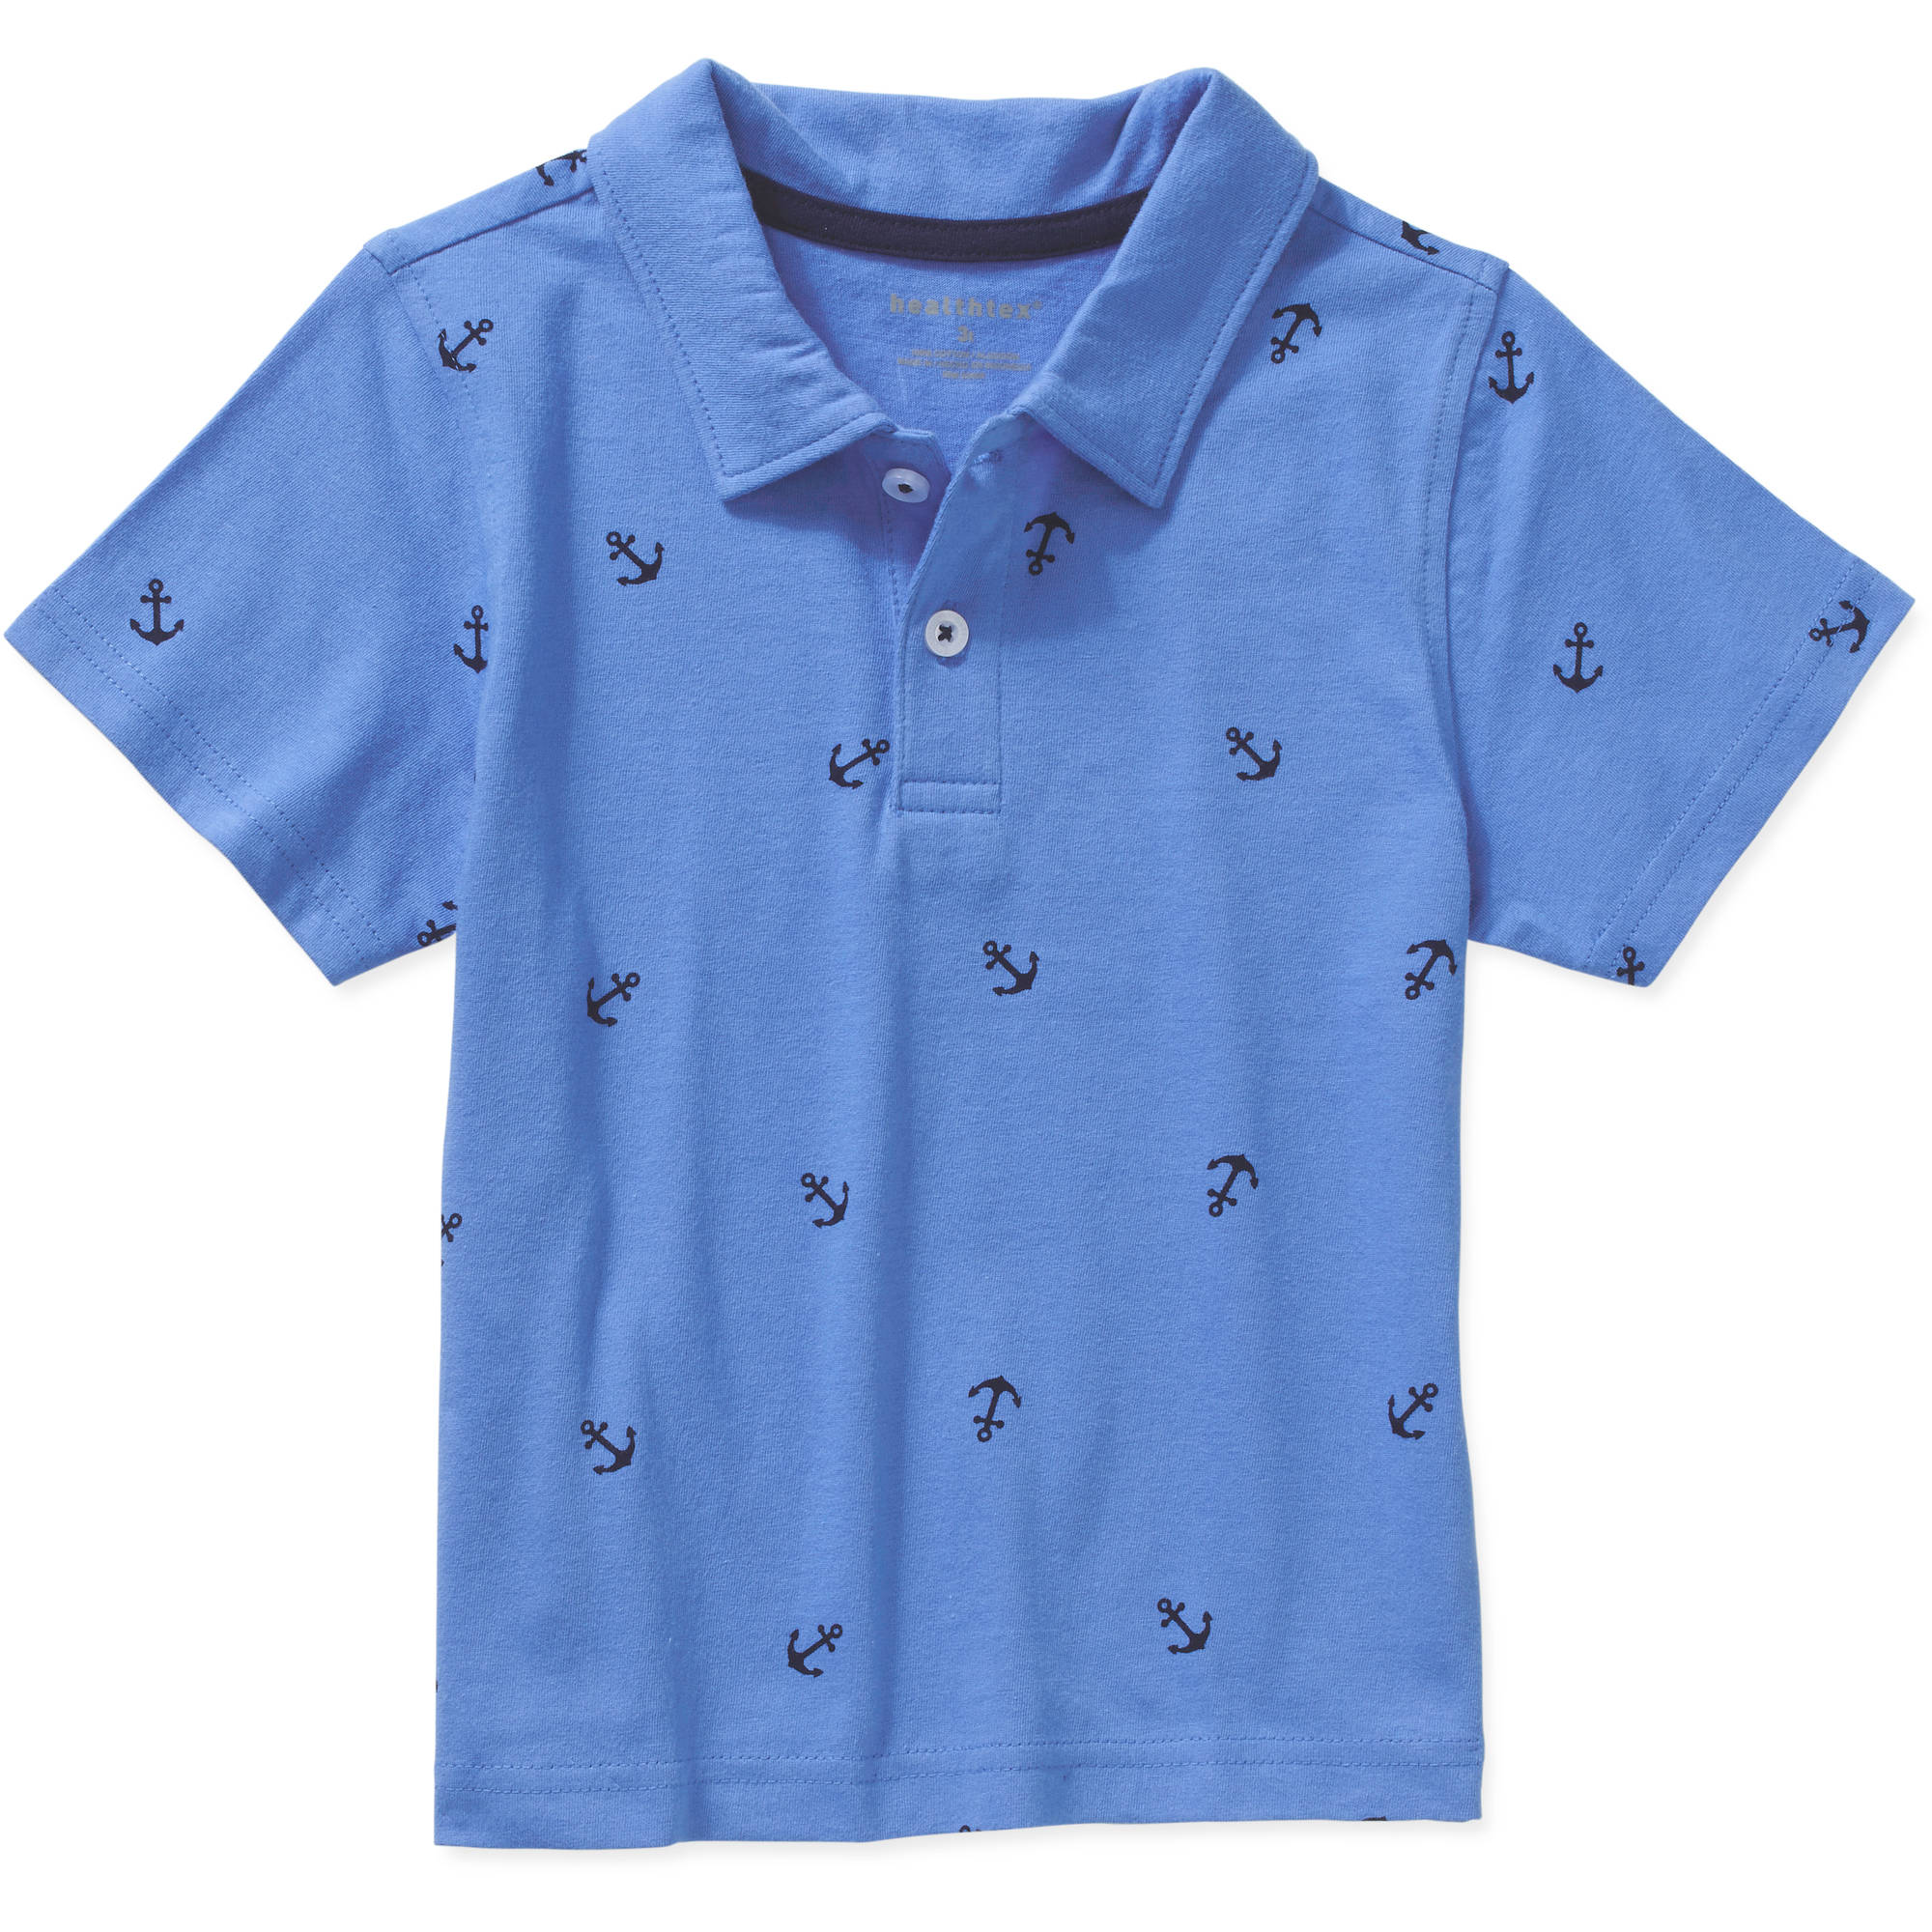 Ht Toddler Boys Ss Printed Polo - image 1 of 1